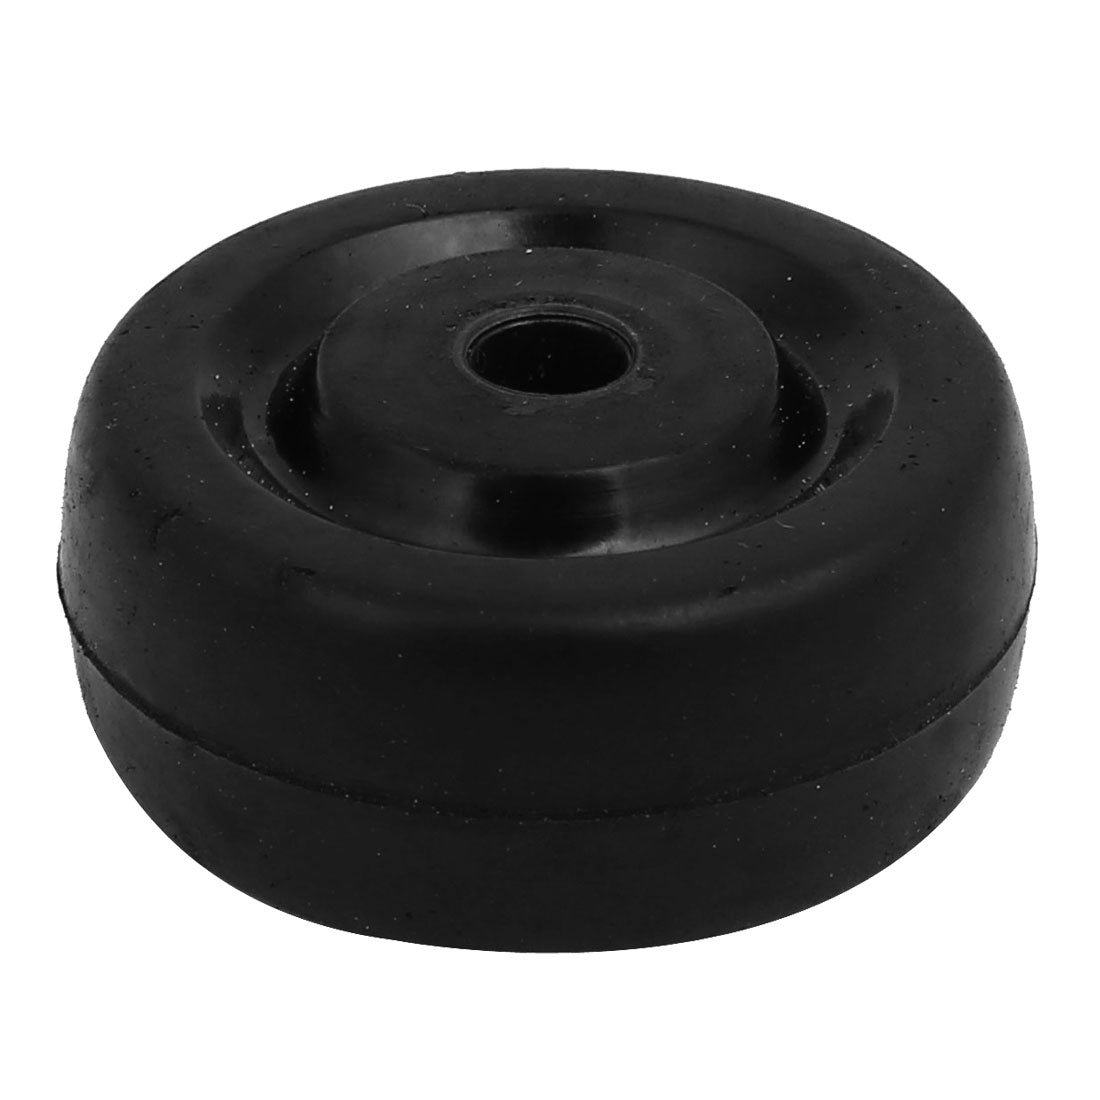 Uxcell Uxcell 1.5-inch Diameter Rubber Wheel Skateboard Trolley Caster Pulley Black 4pcs